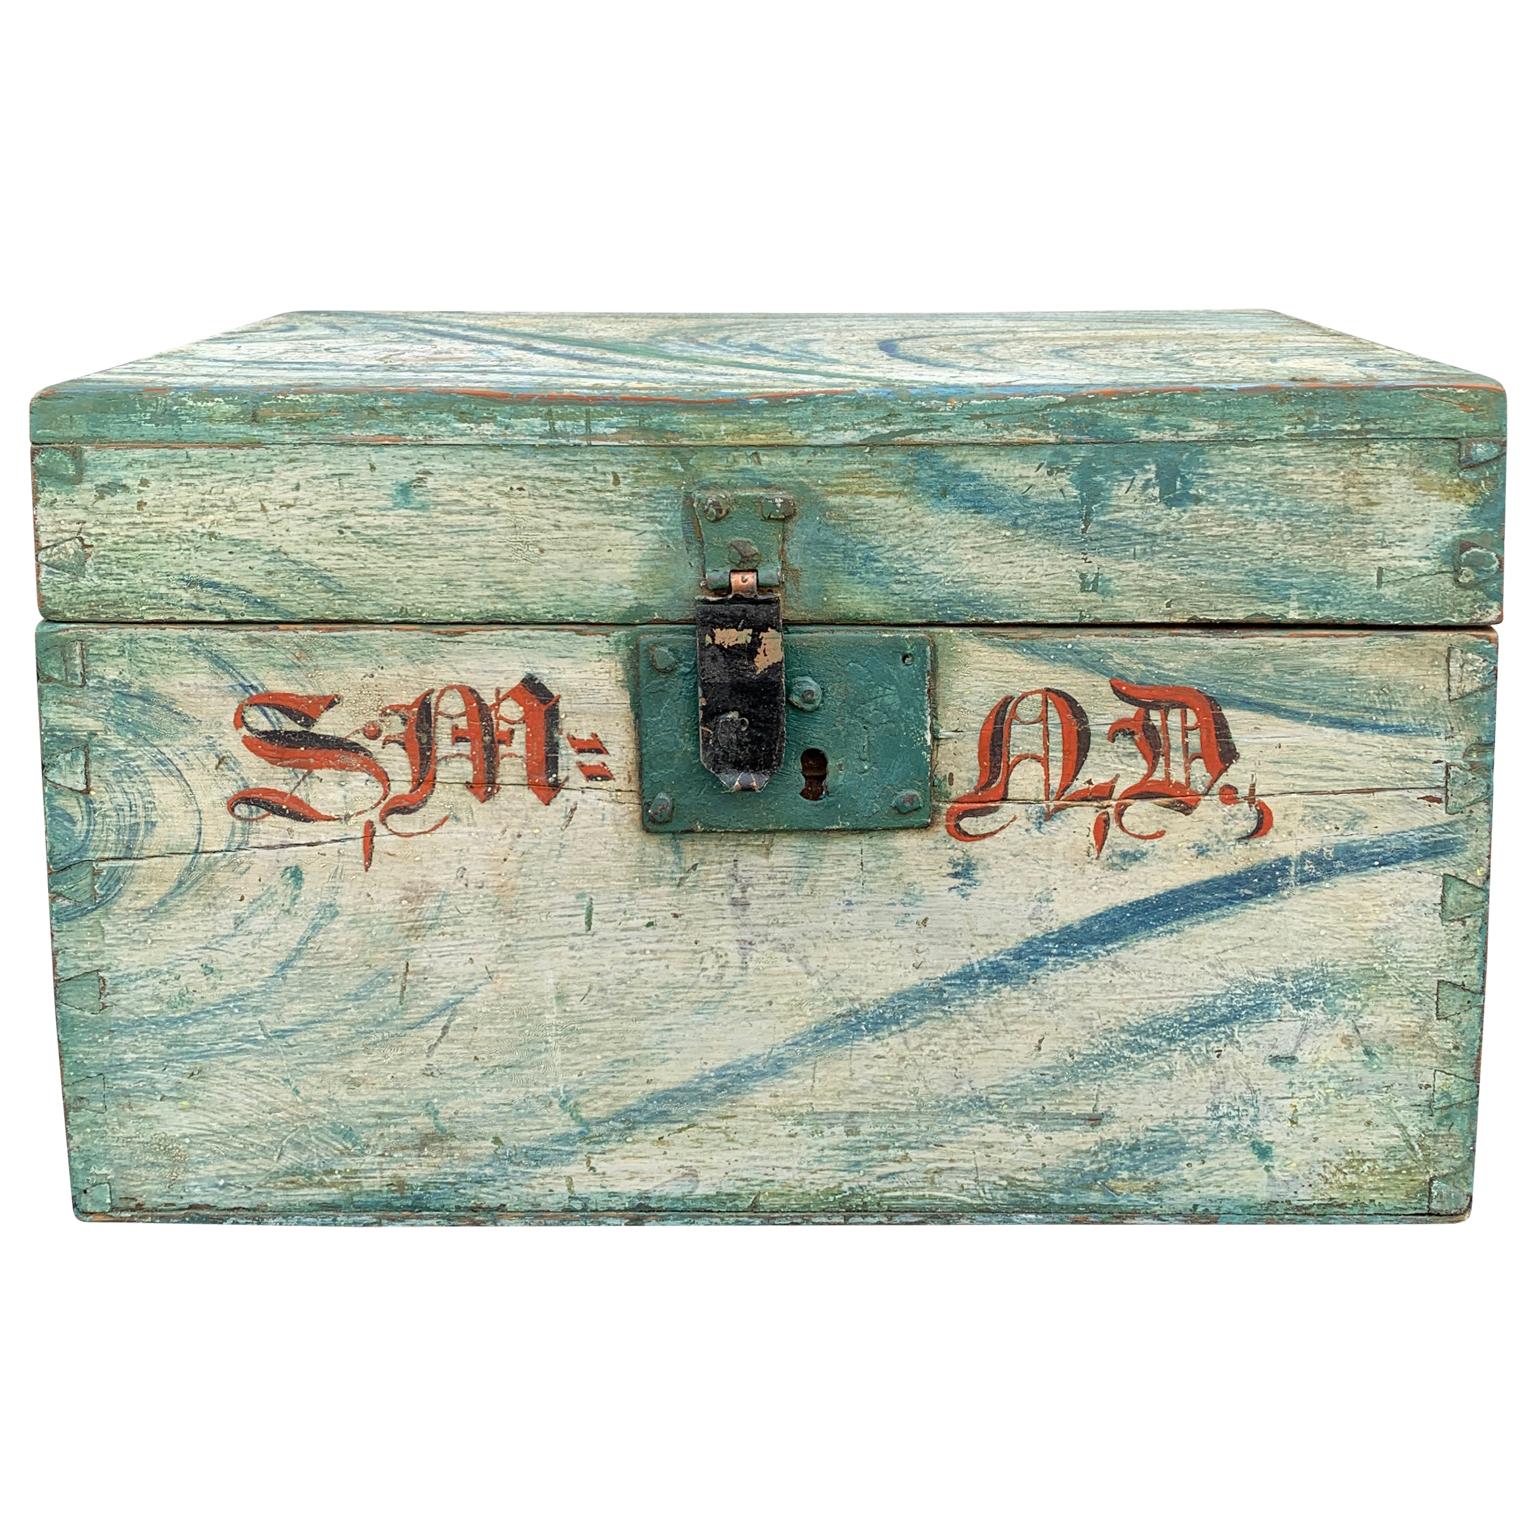 Early 19th century hand painted folk art box in original blue, white and greenish faux marble decorations, circa 1825.
The late Empire box is also decorated with a monogram on the front side and retains its original metal hardware. It as belonged to